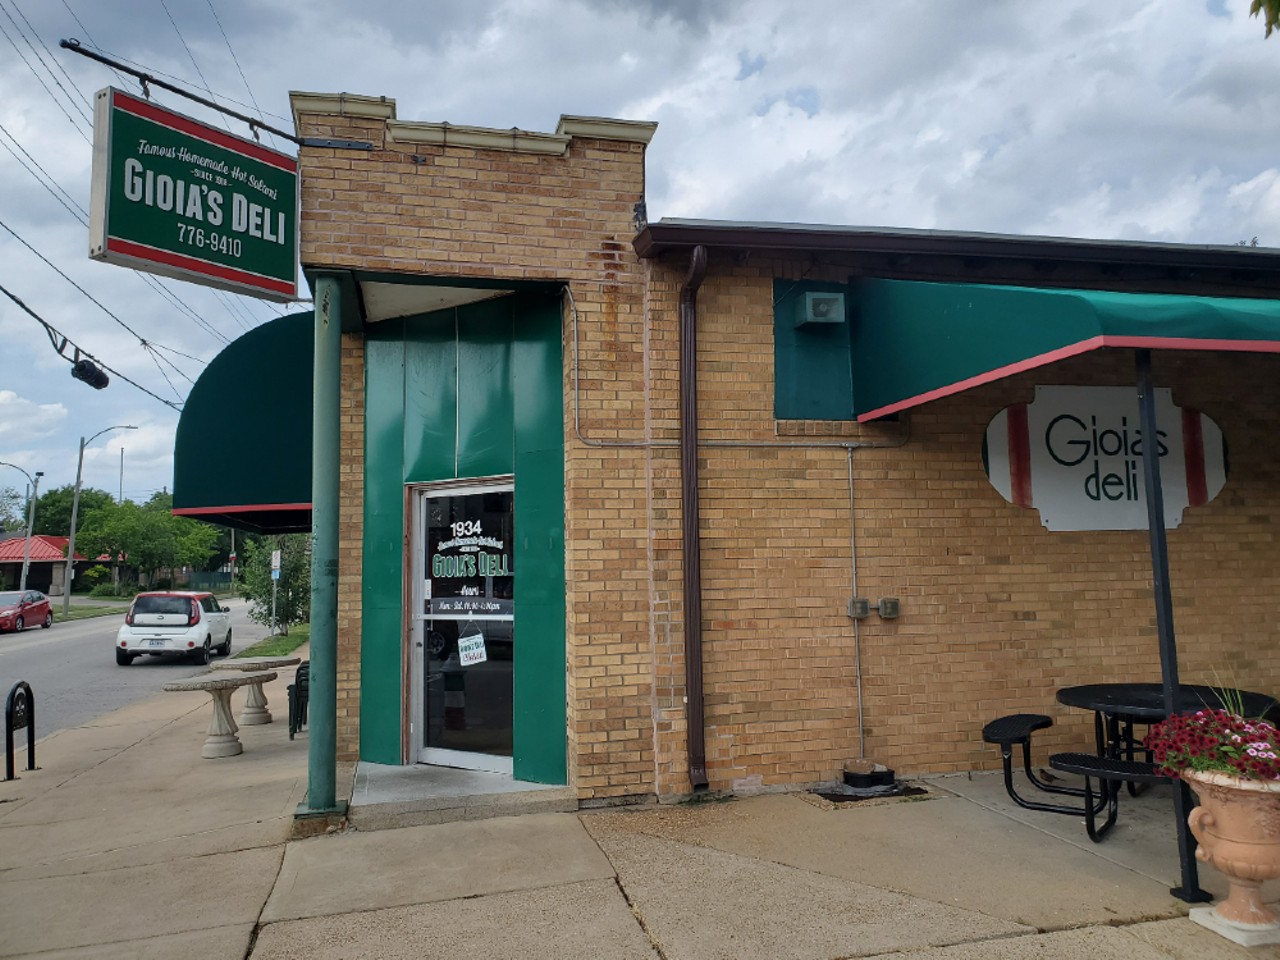 Gioia’s Deli
(1934 Macklind Avenue, 314-776-9410)
r/StLouis Reddit user HD61480 recommended Gioia's for "a hot salami and roast beef sandwich on garlic cheese bread."